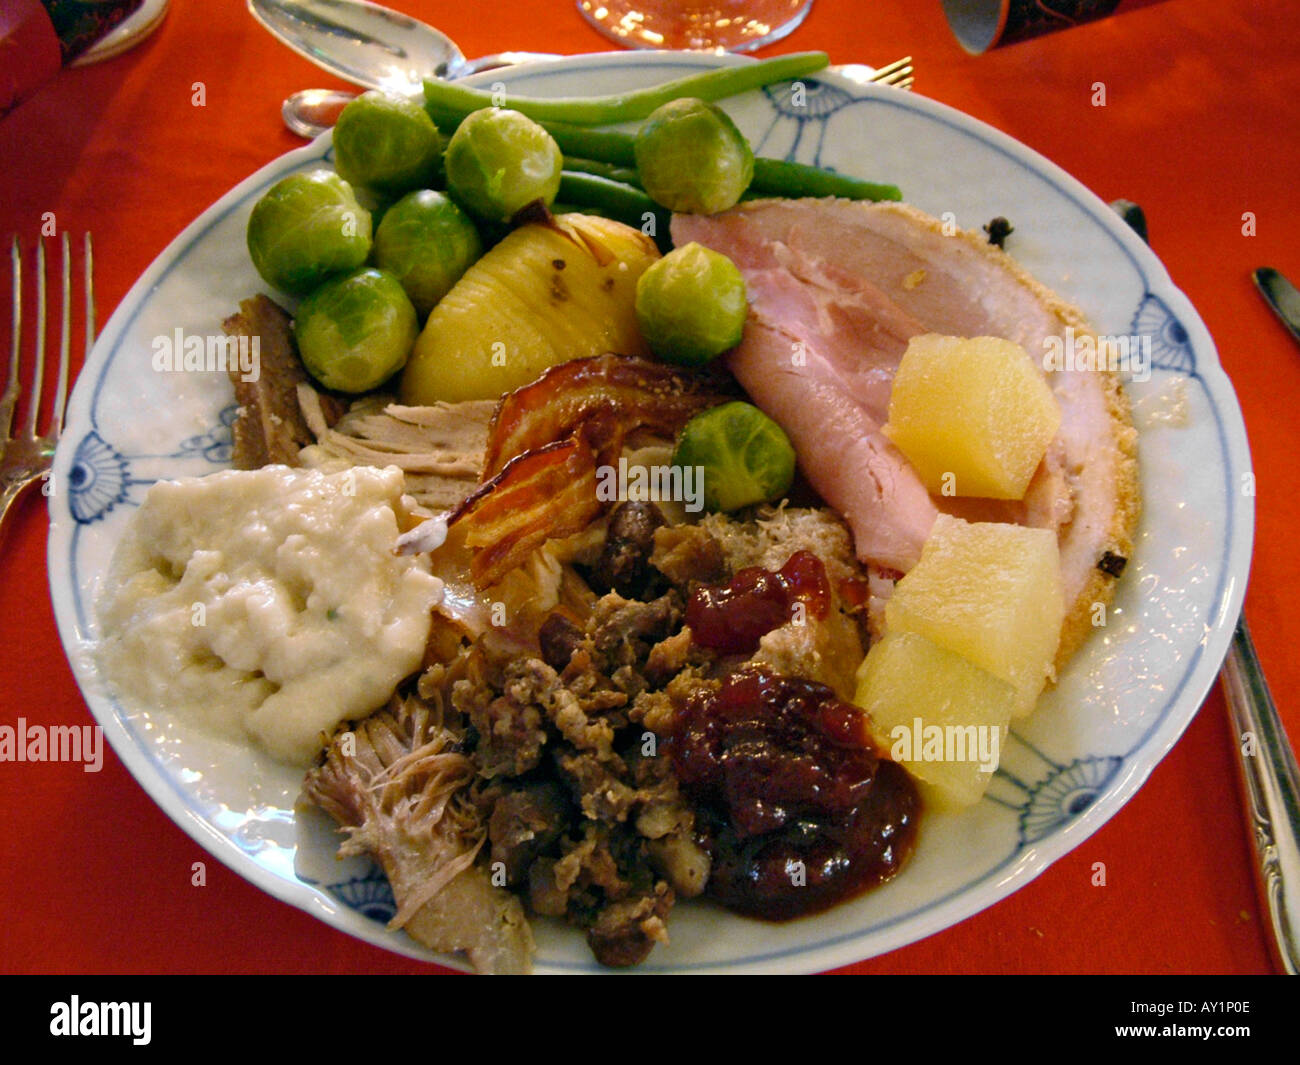 Most Popular British Christmas Dinner : 1 : Roast turkey is the most common choice of meal.